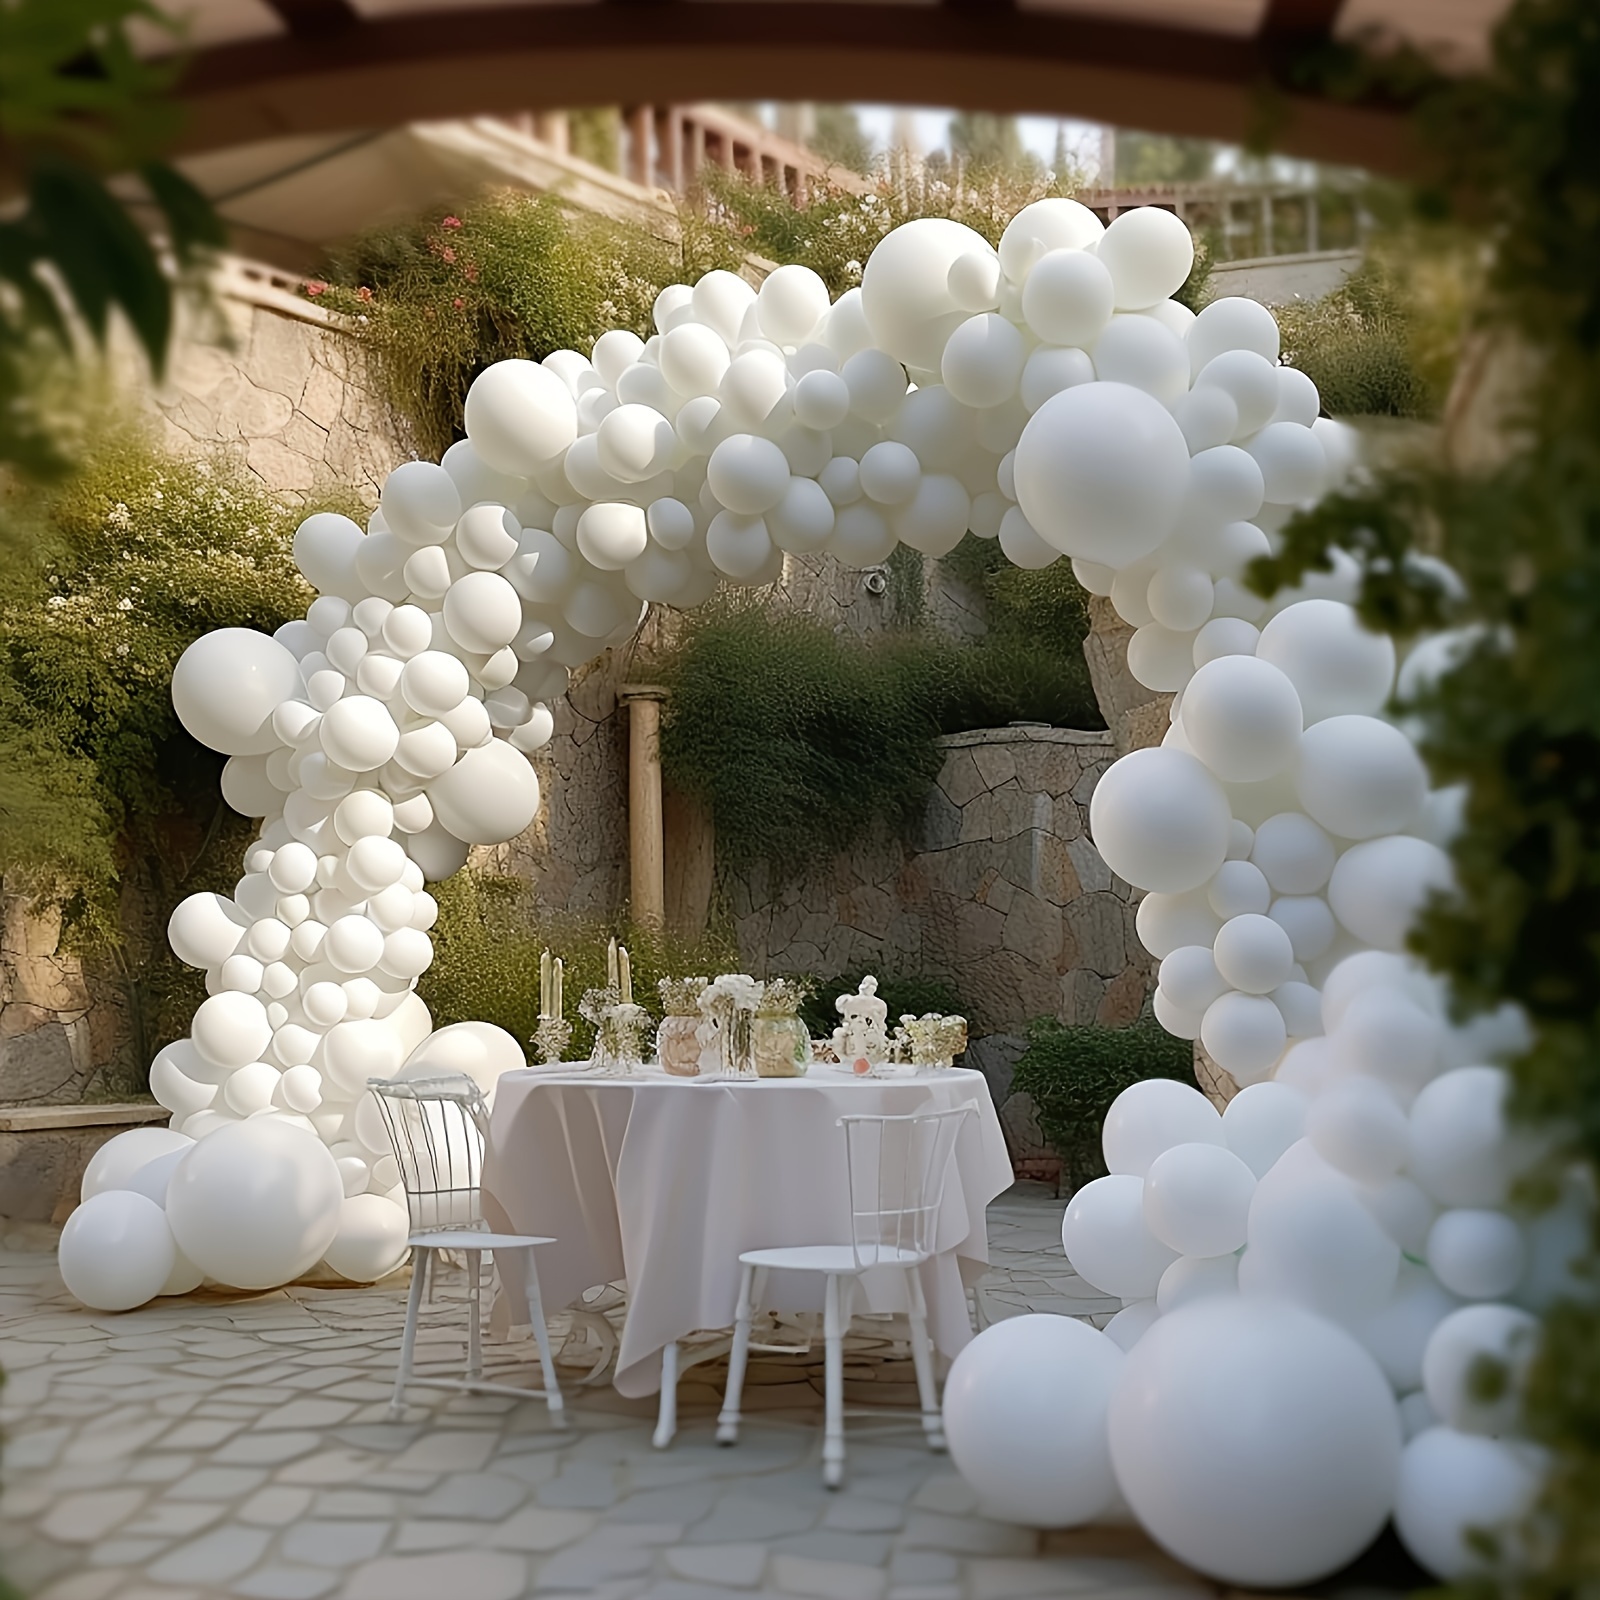 

132pcs White Balloon Garland Arch Kit, Different Sizes 18" 12" 10" 5" Balloon Garland Arch Kit, Perfect For Birthday Party, Graduation, Wedding Decor, Birthday Photo Prop, Birthday Party Easter Gift